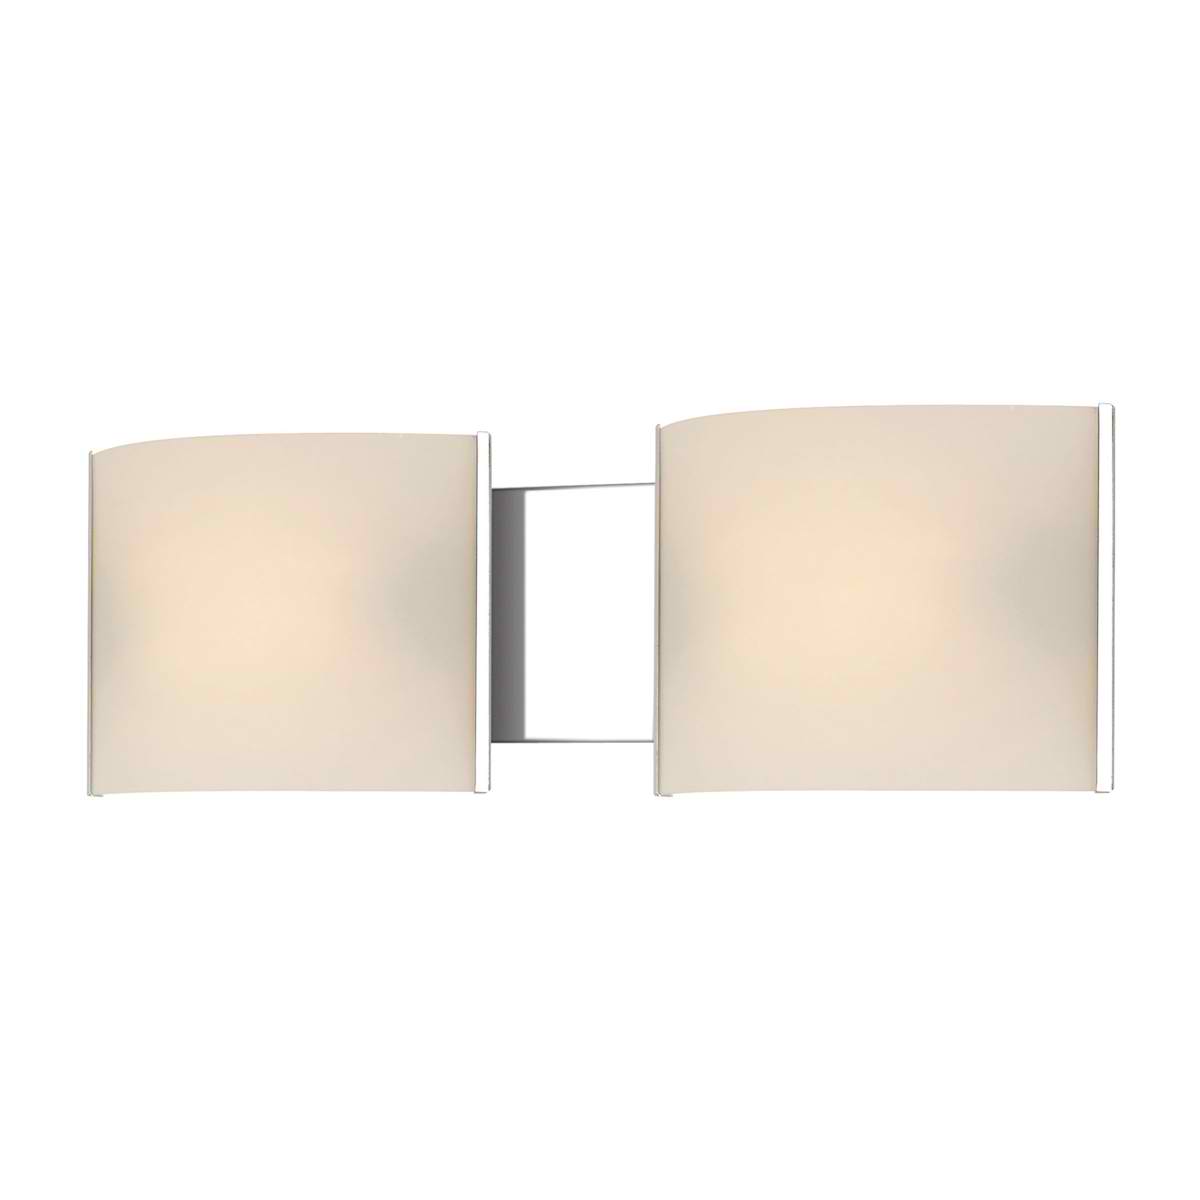 Pannelli Vanity - 2 Light with Lamps. White Opal Glass / Chrome Finish